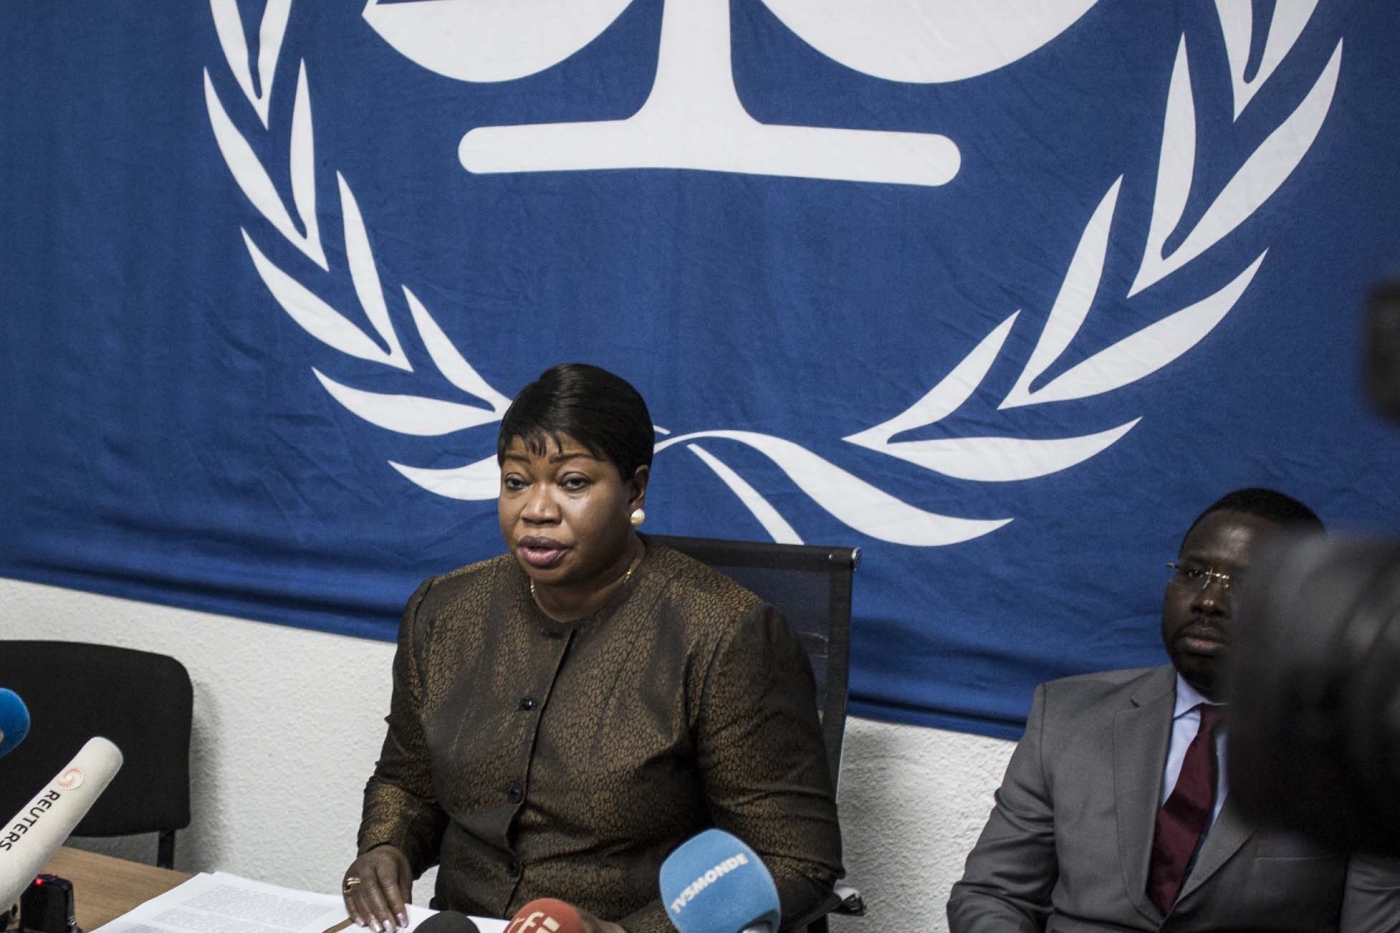 Last September, then-Secretary of State Mike Pompeo announced travel restrictions and financial sanctions on the ICC's Fatou Bensouda and a senior aide